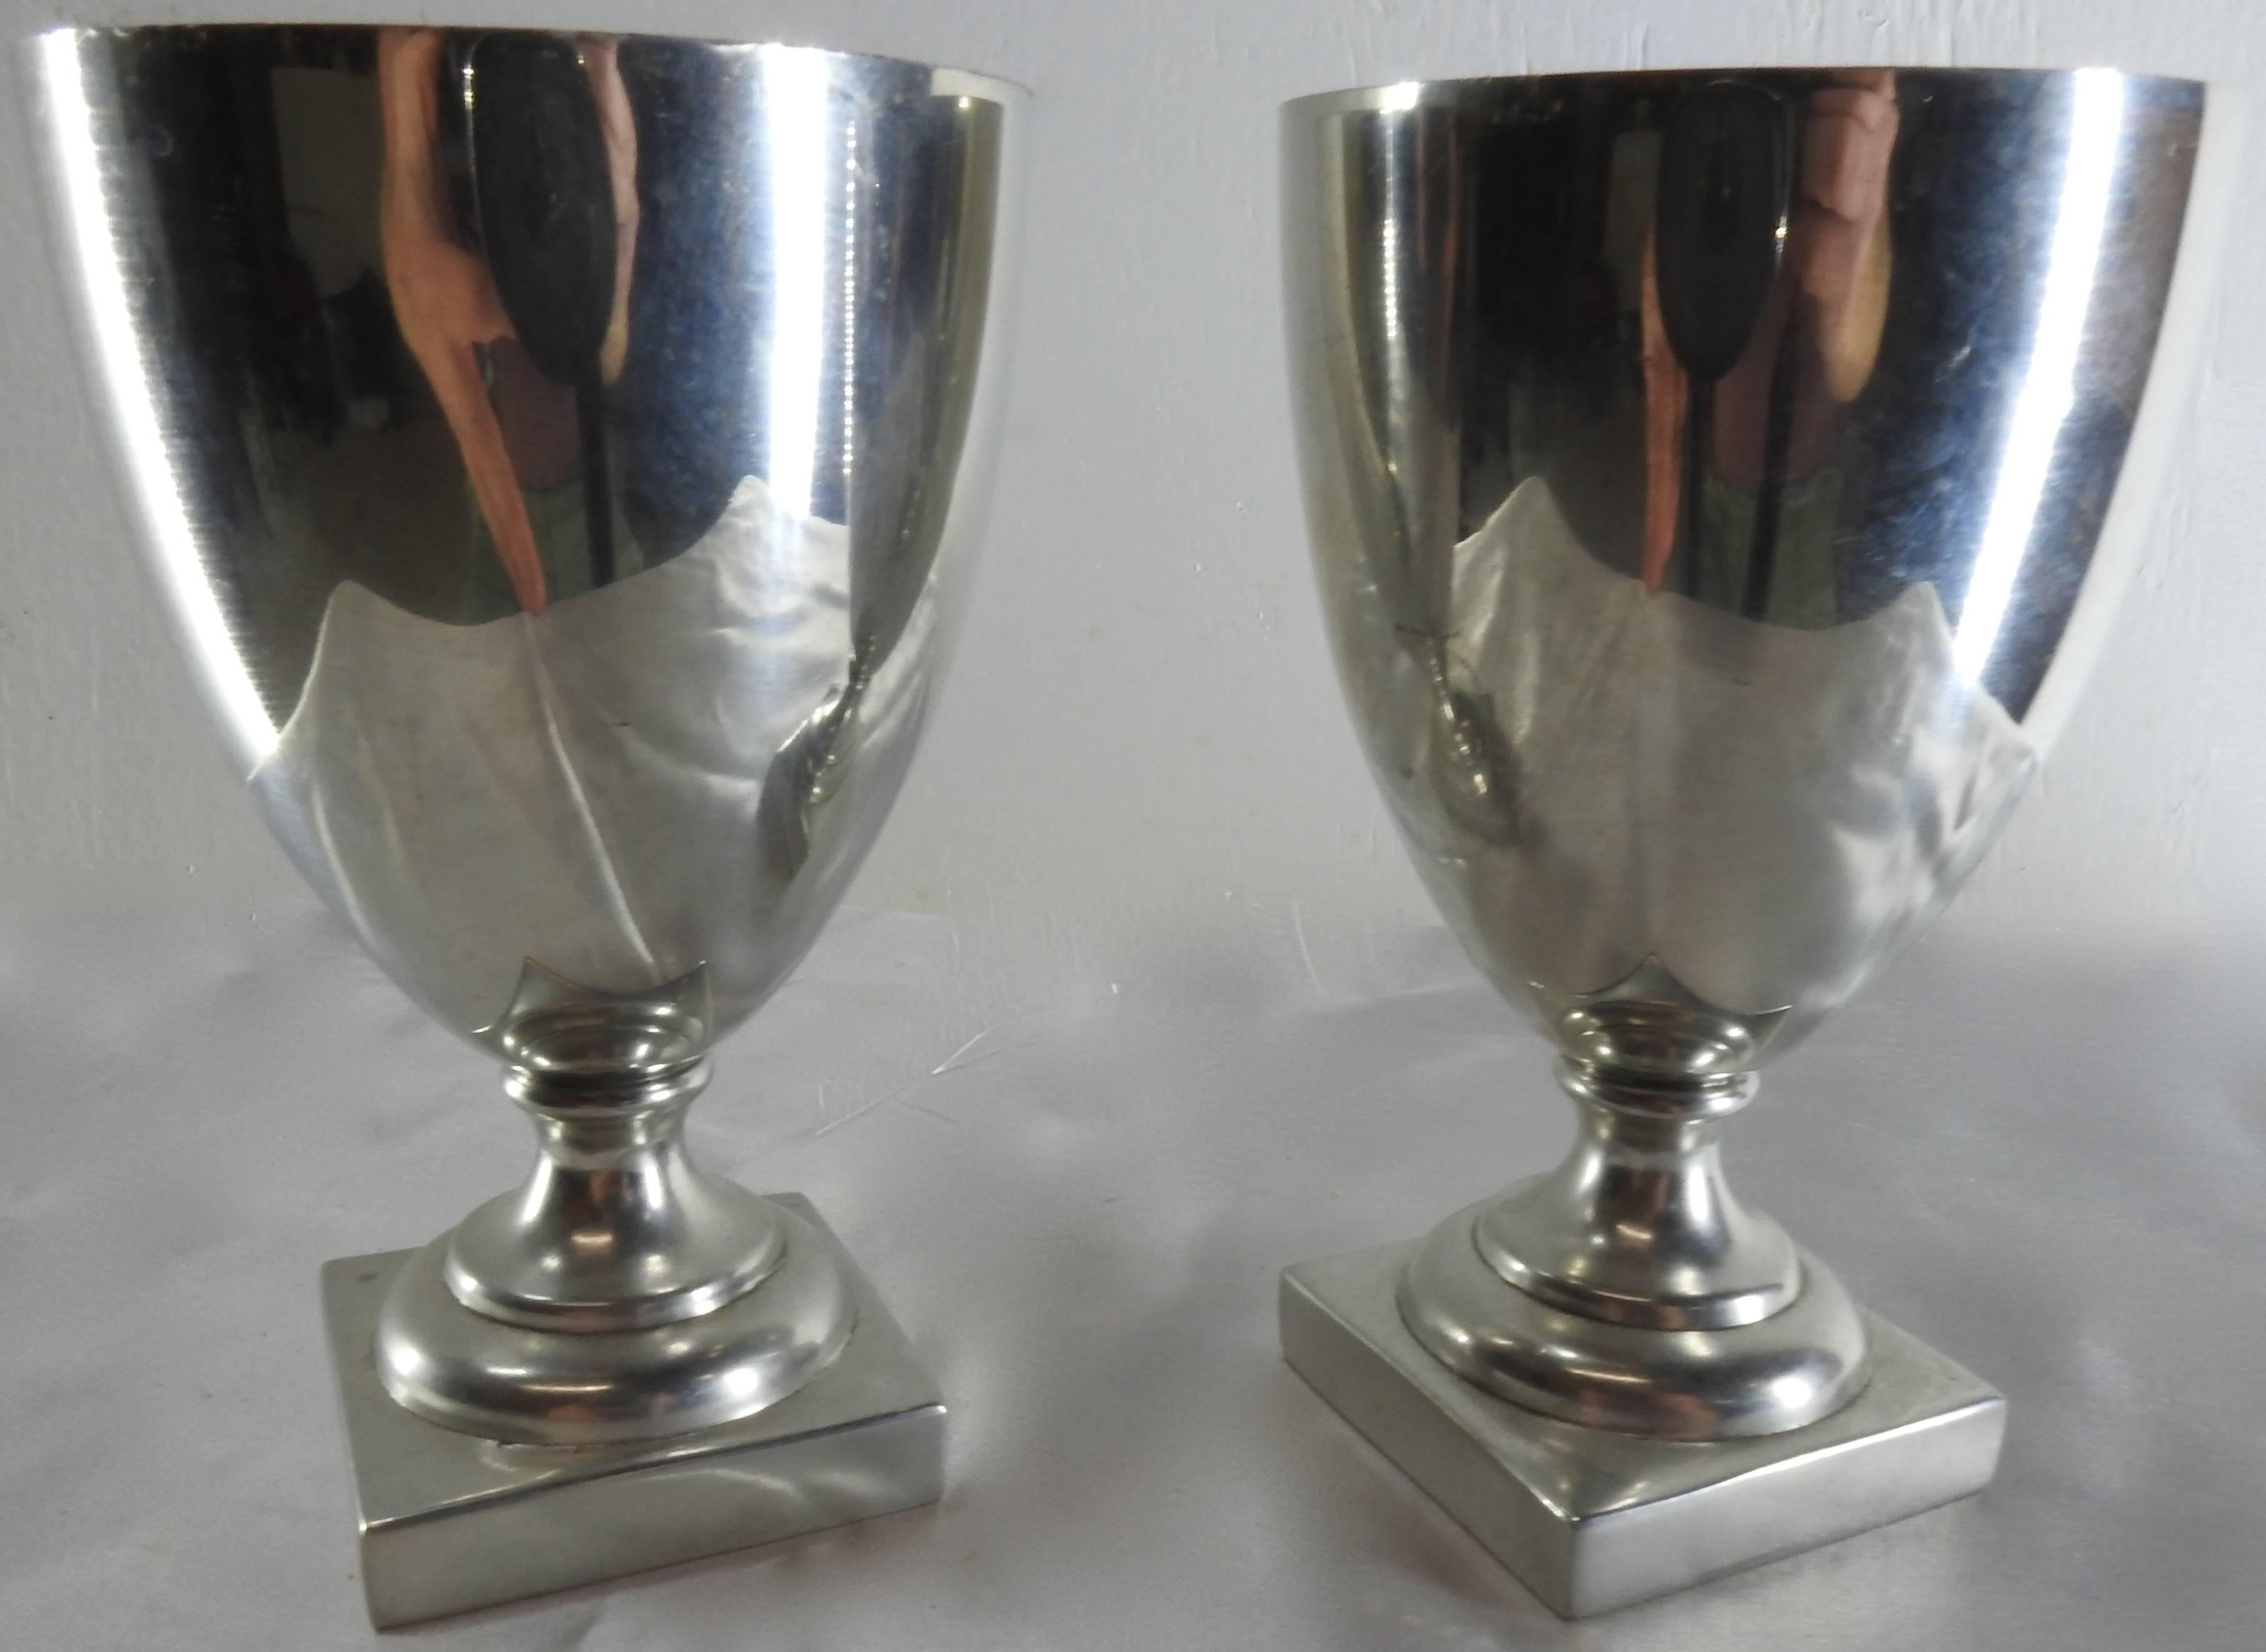 Featured is a pair of Williamsburg goblets by Shirley Pewter which has been in business over 50 years. The goblets are mounted on a square base and the Classic style is beautiful.